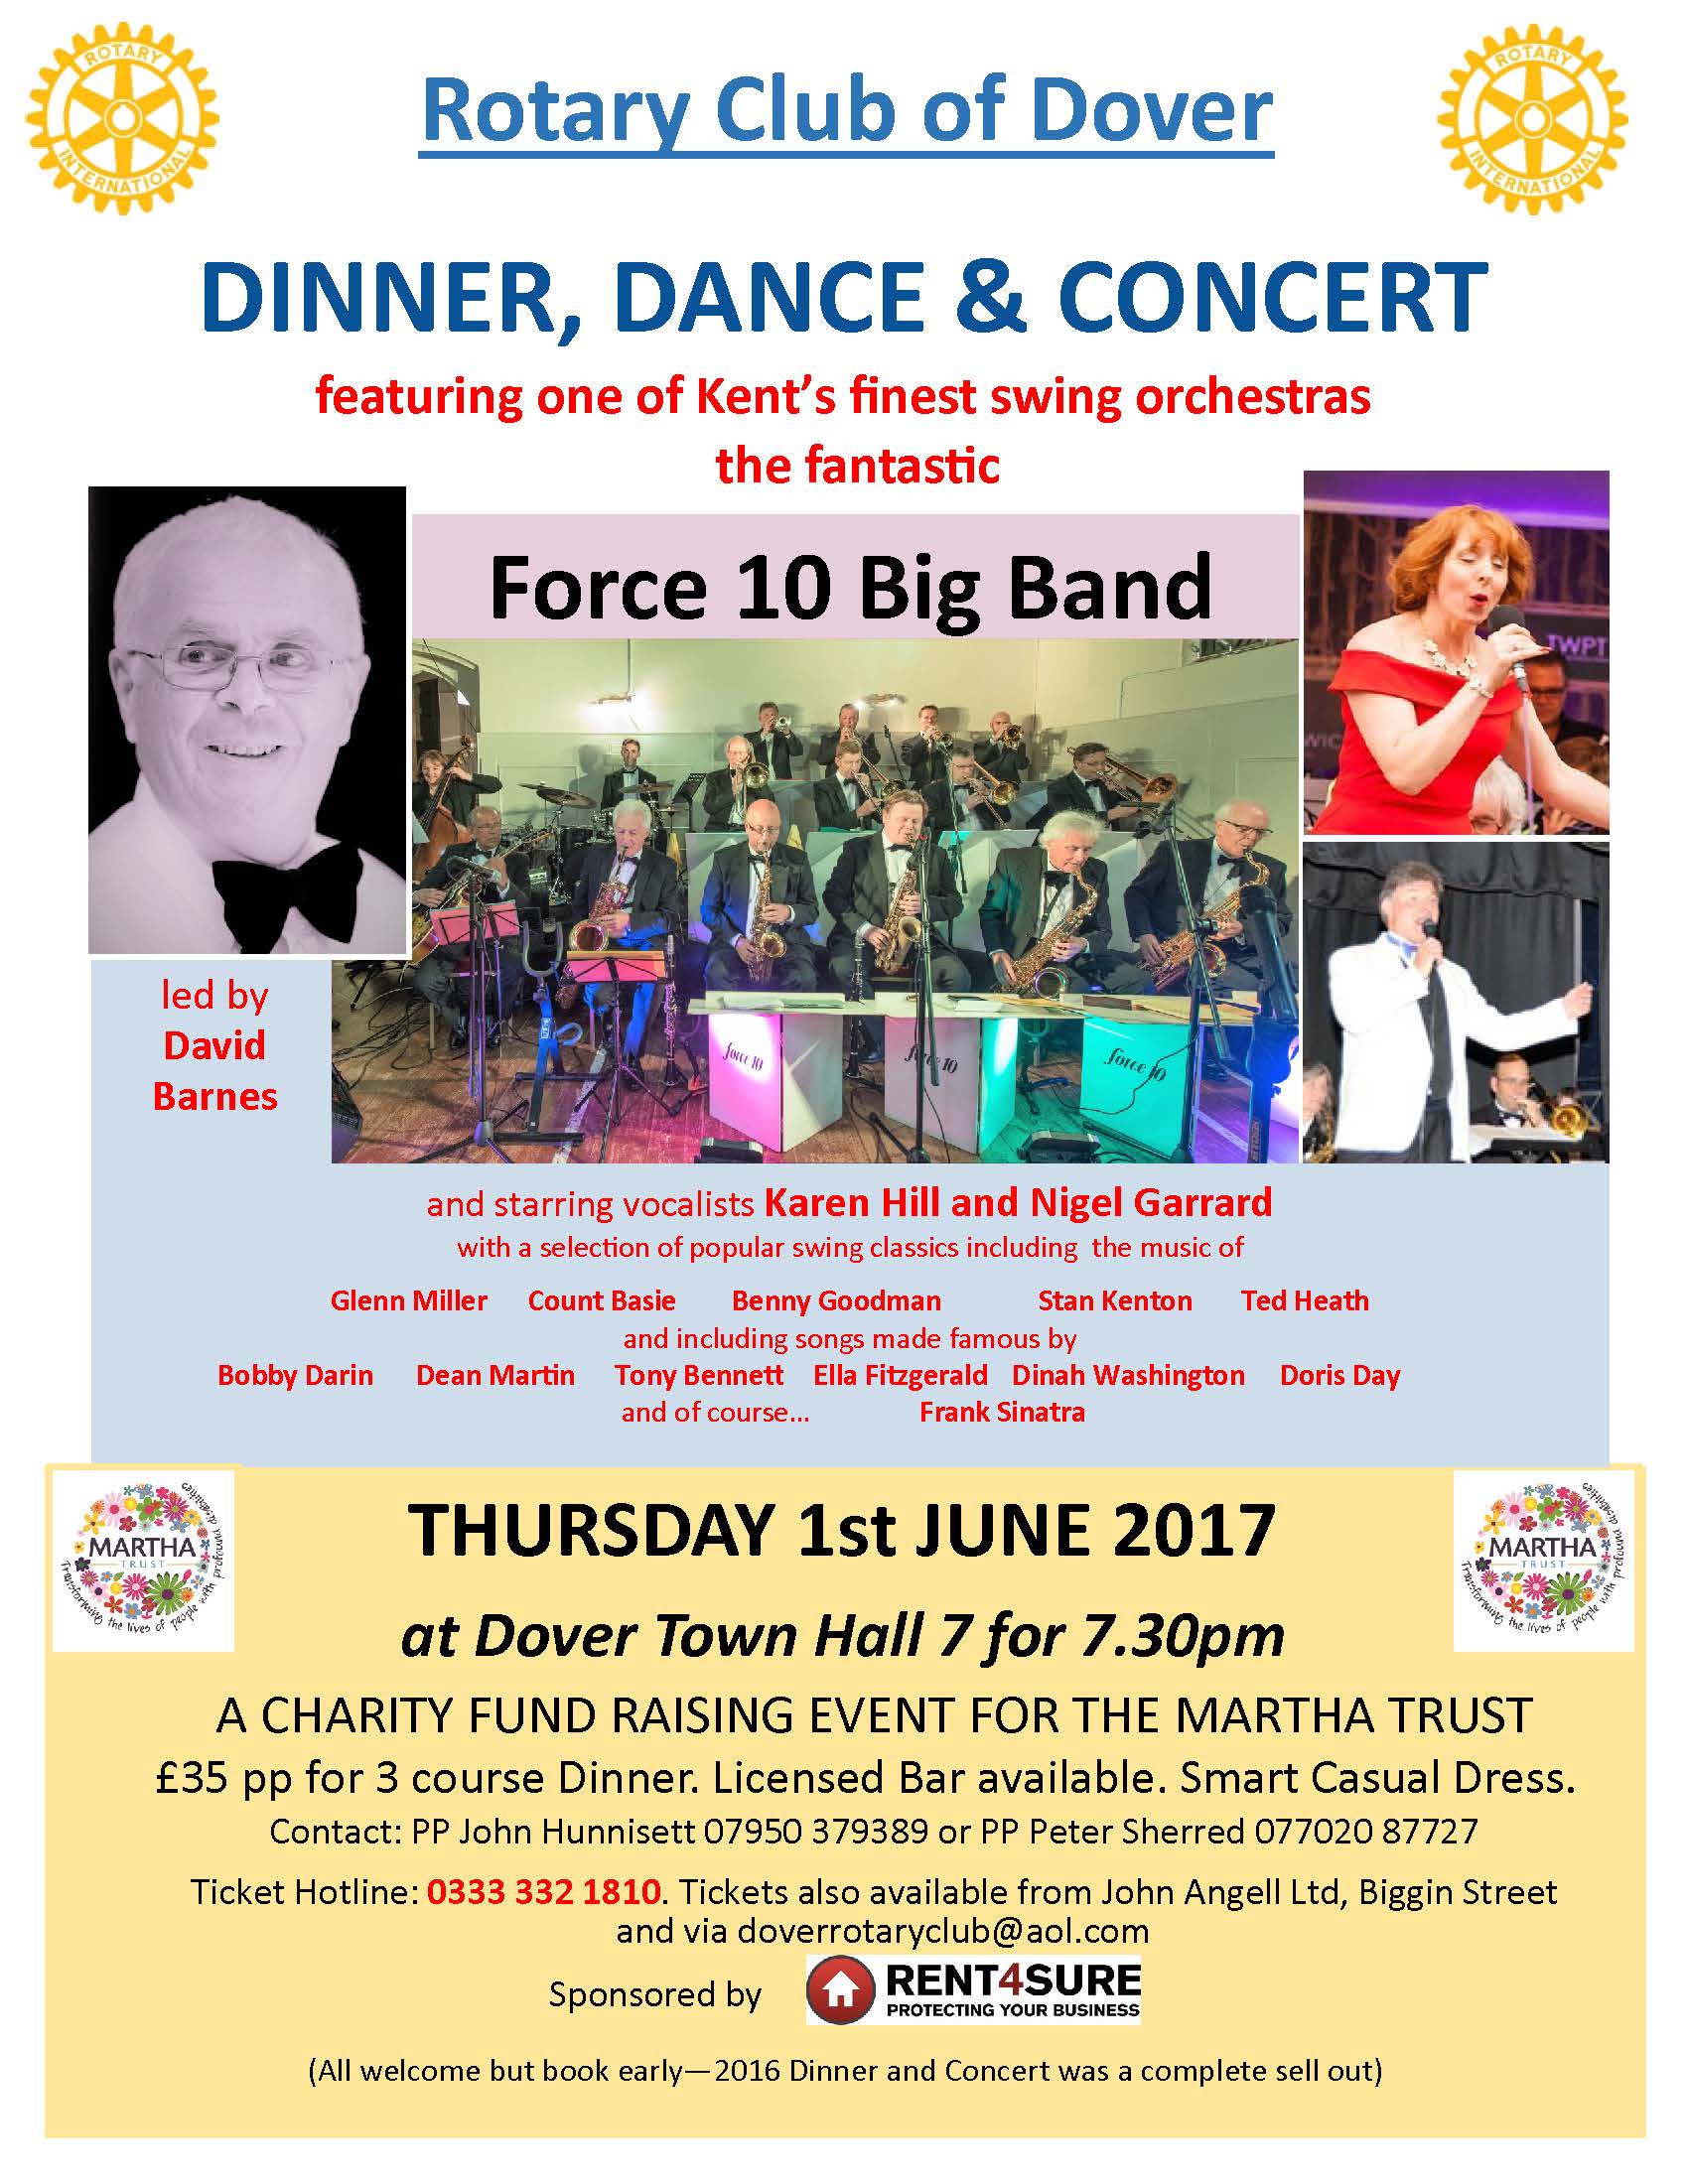 Rotary Club of Dover Dinner, Dance and Concert